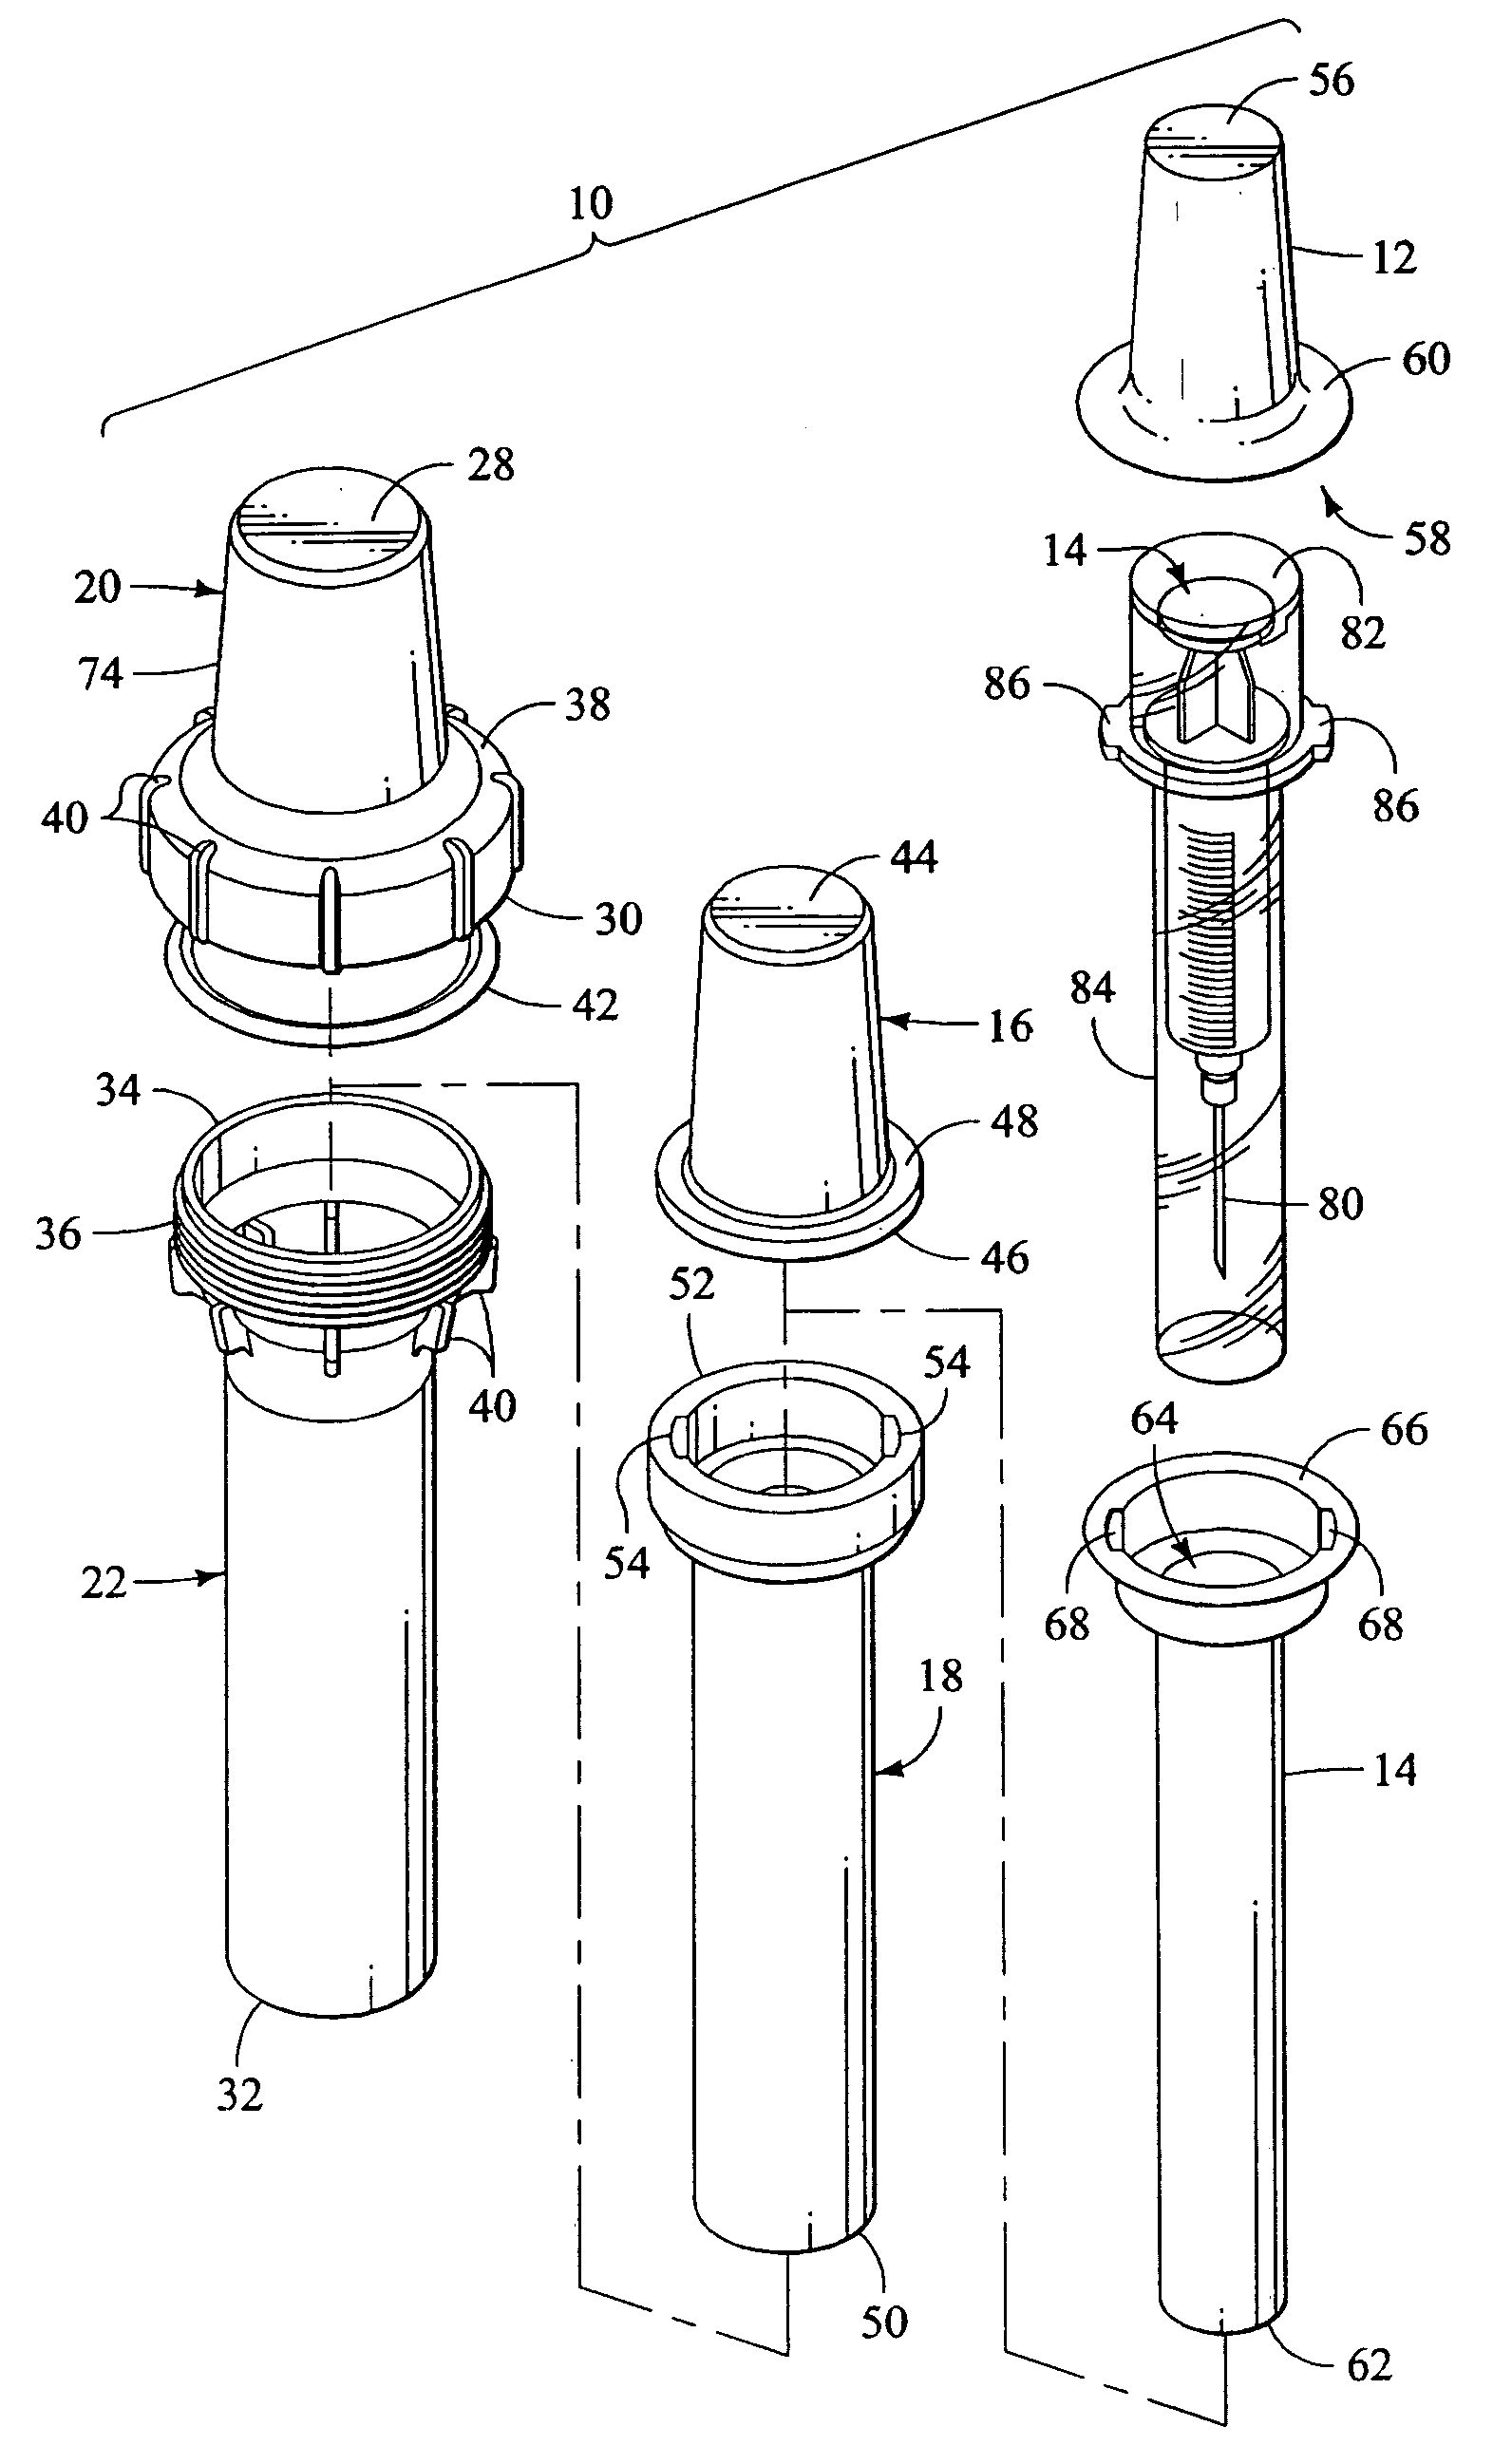 Apparatus and method for transporting radiopharmaceuticals